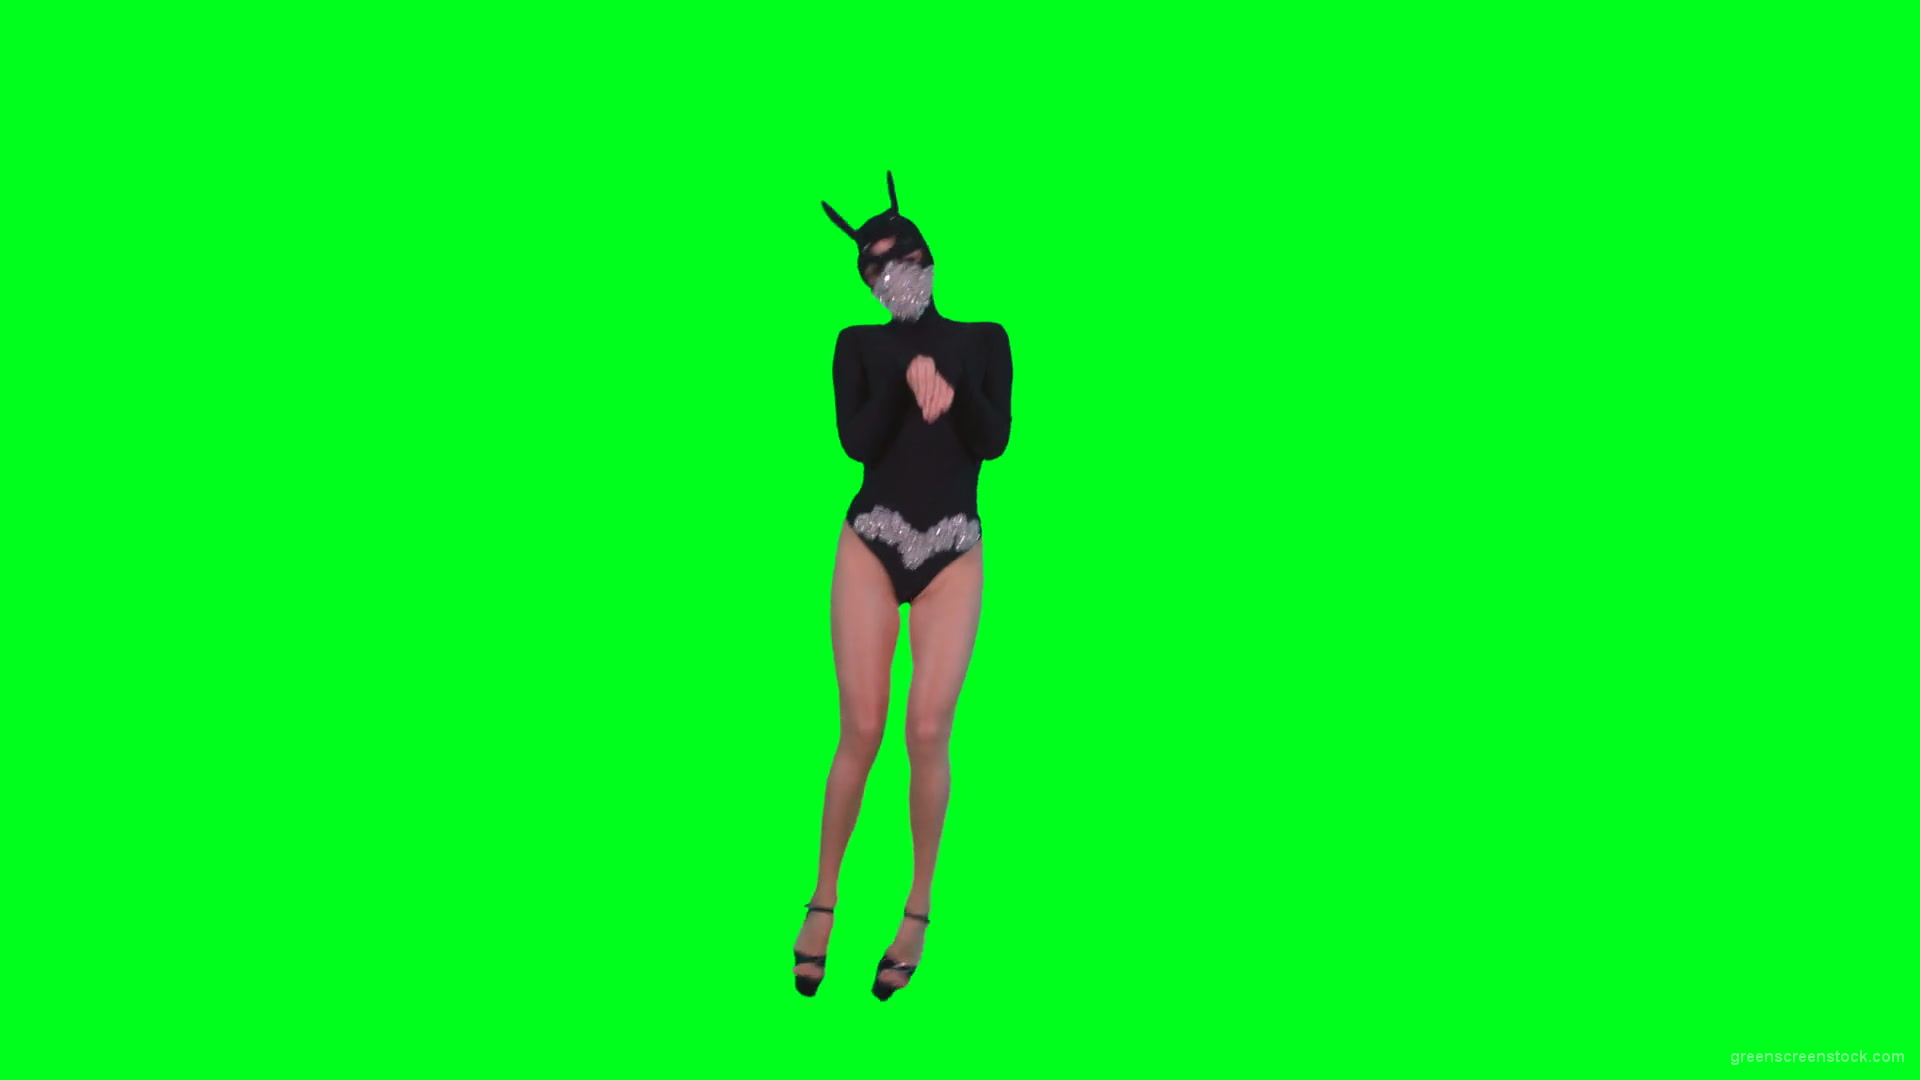 Go-Go-Dancing-Girl-in-Rabbit-Mask-jumping-in-black-costume-on-Green-Screen-4K-Video-Footage-1920_009 Green Screen Stock